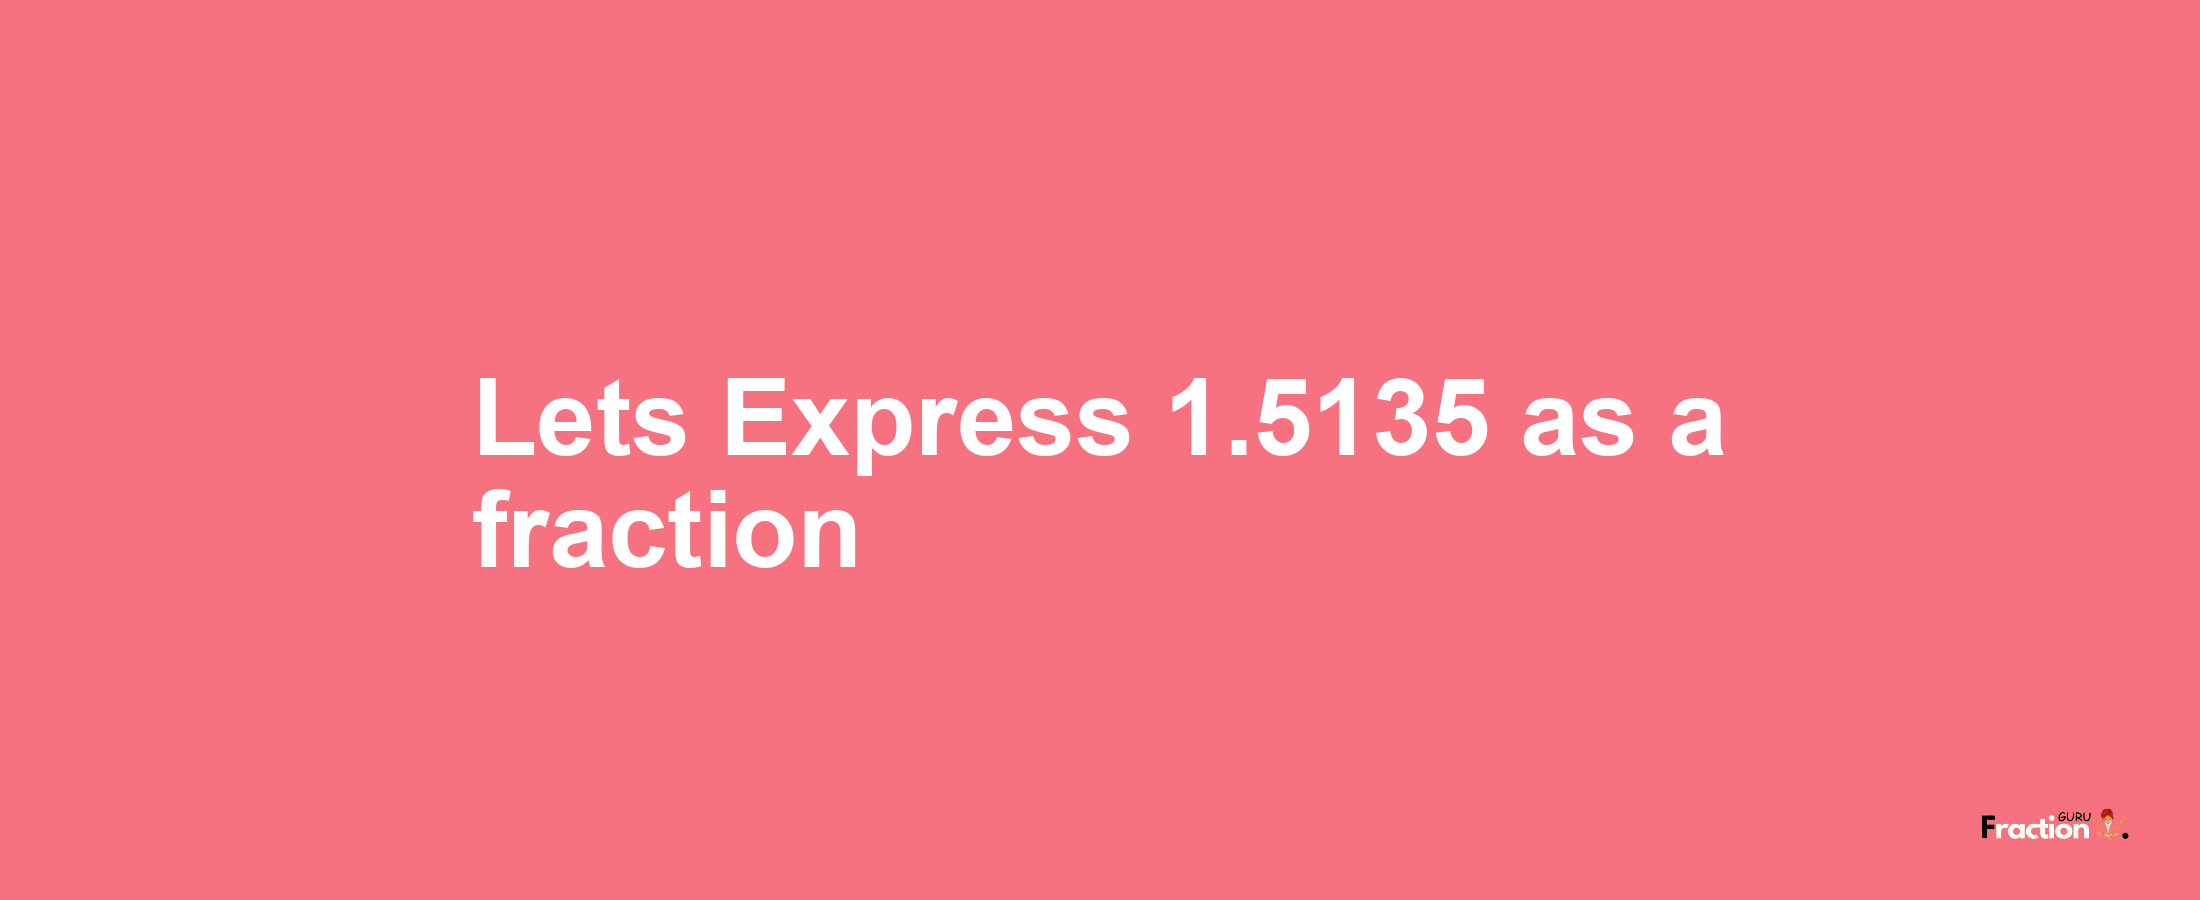 Lets Express 1.5135 as afraction